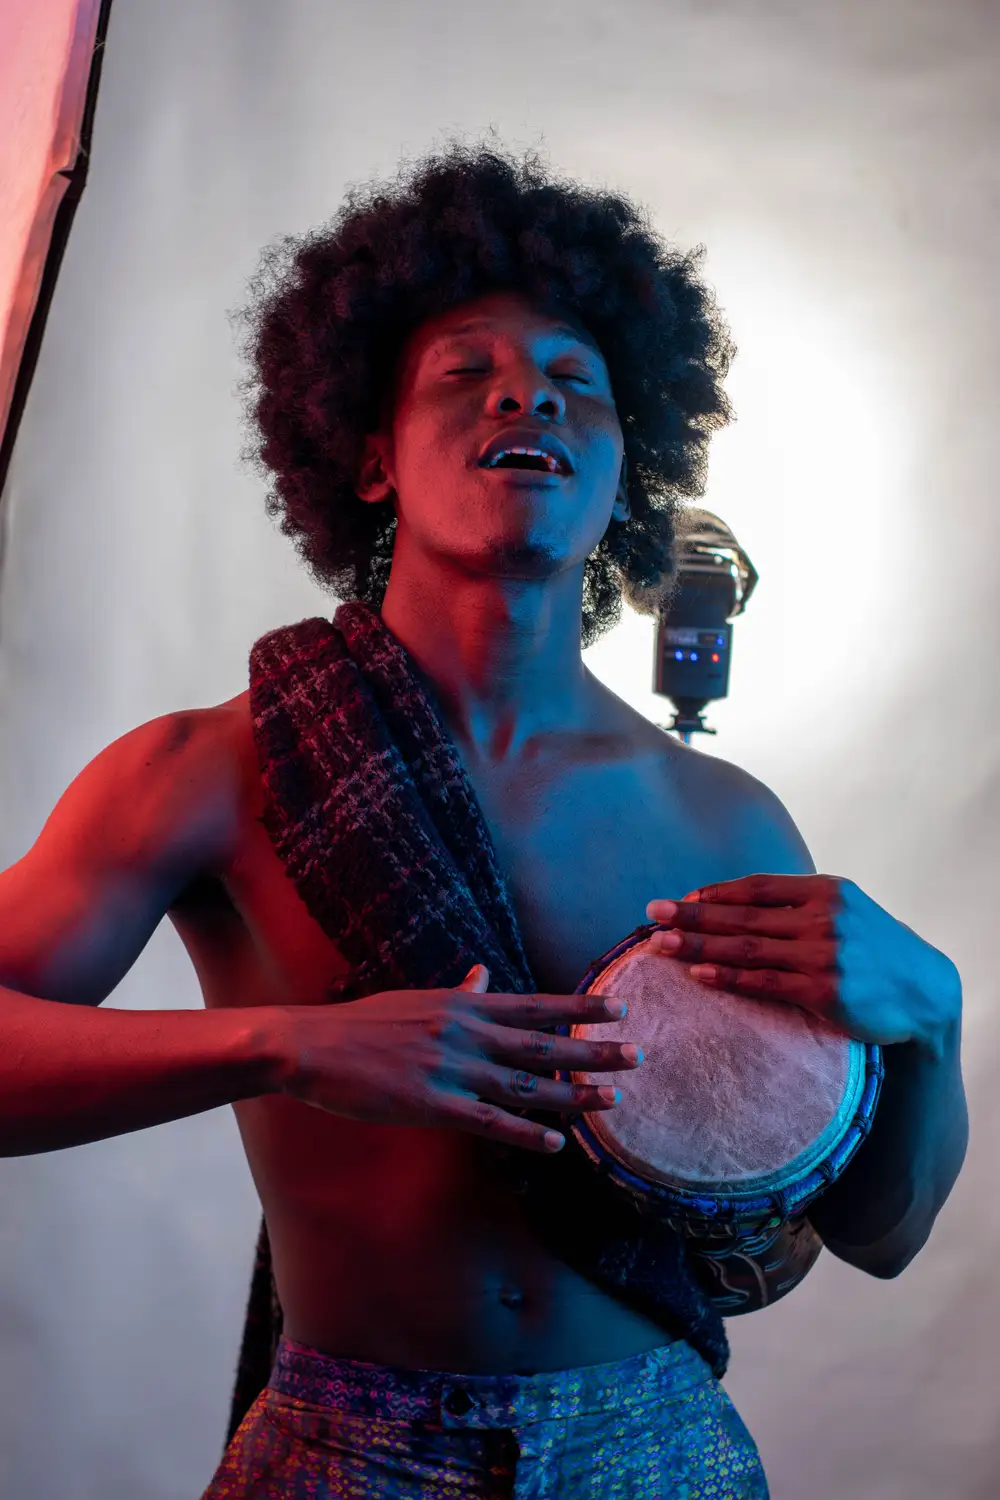 model on afro hairstyle plays drum 4